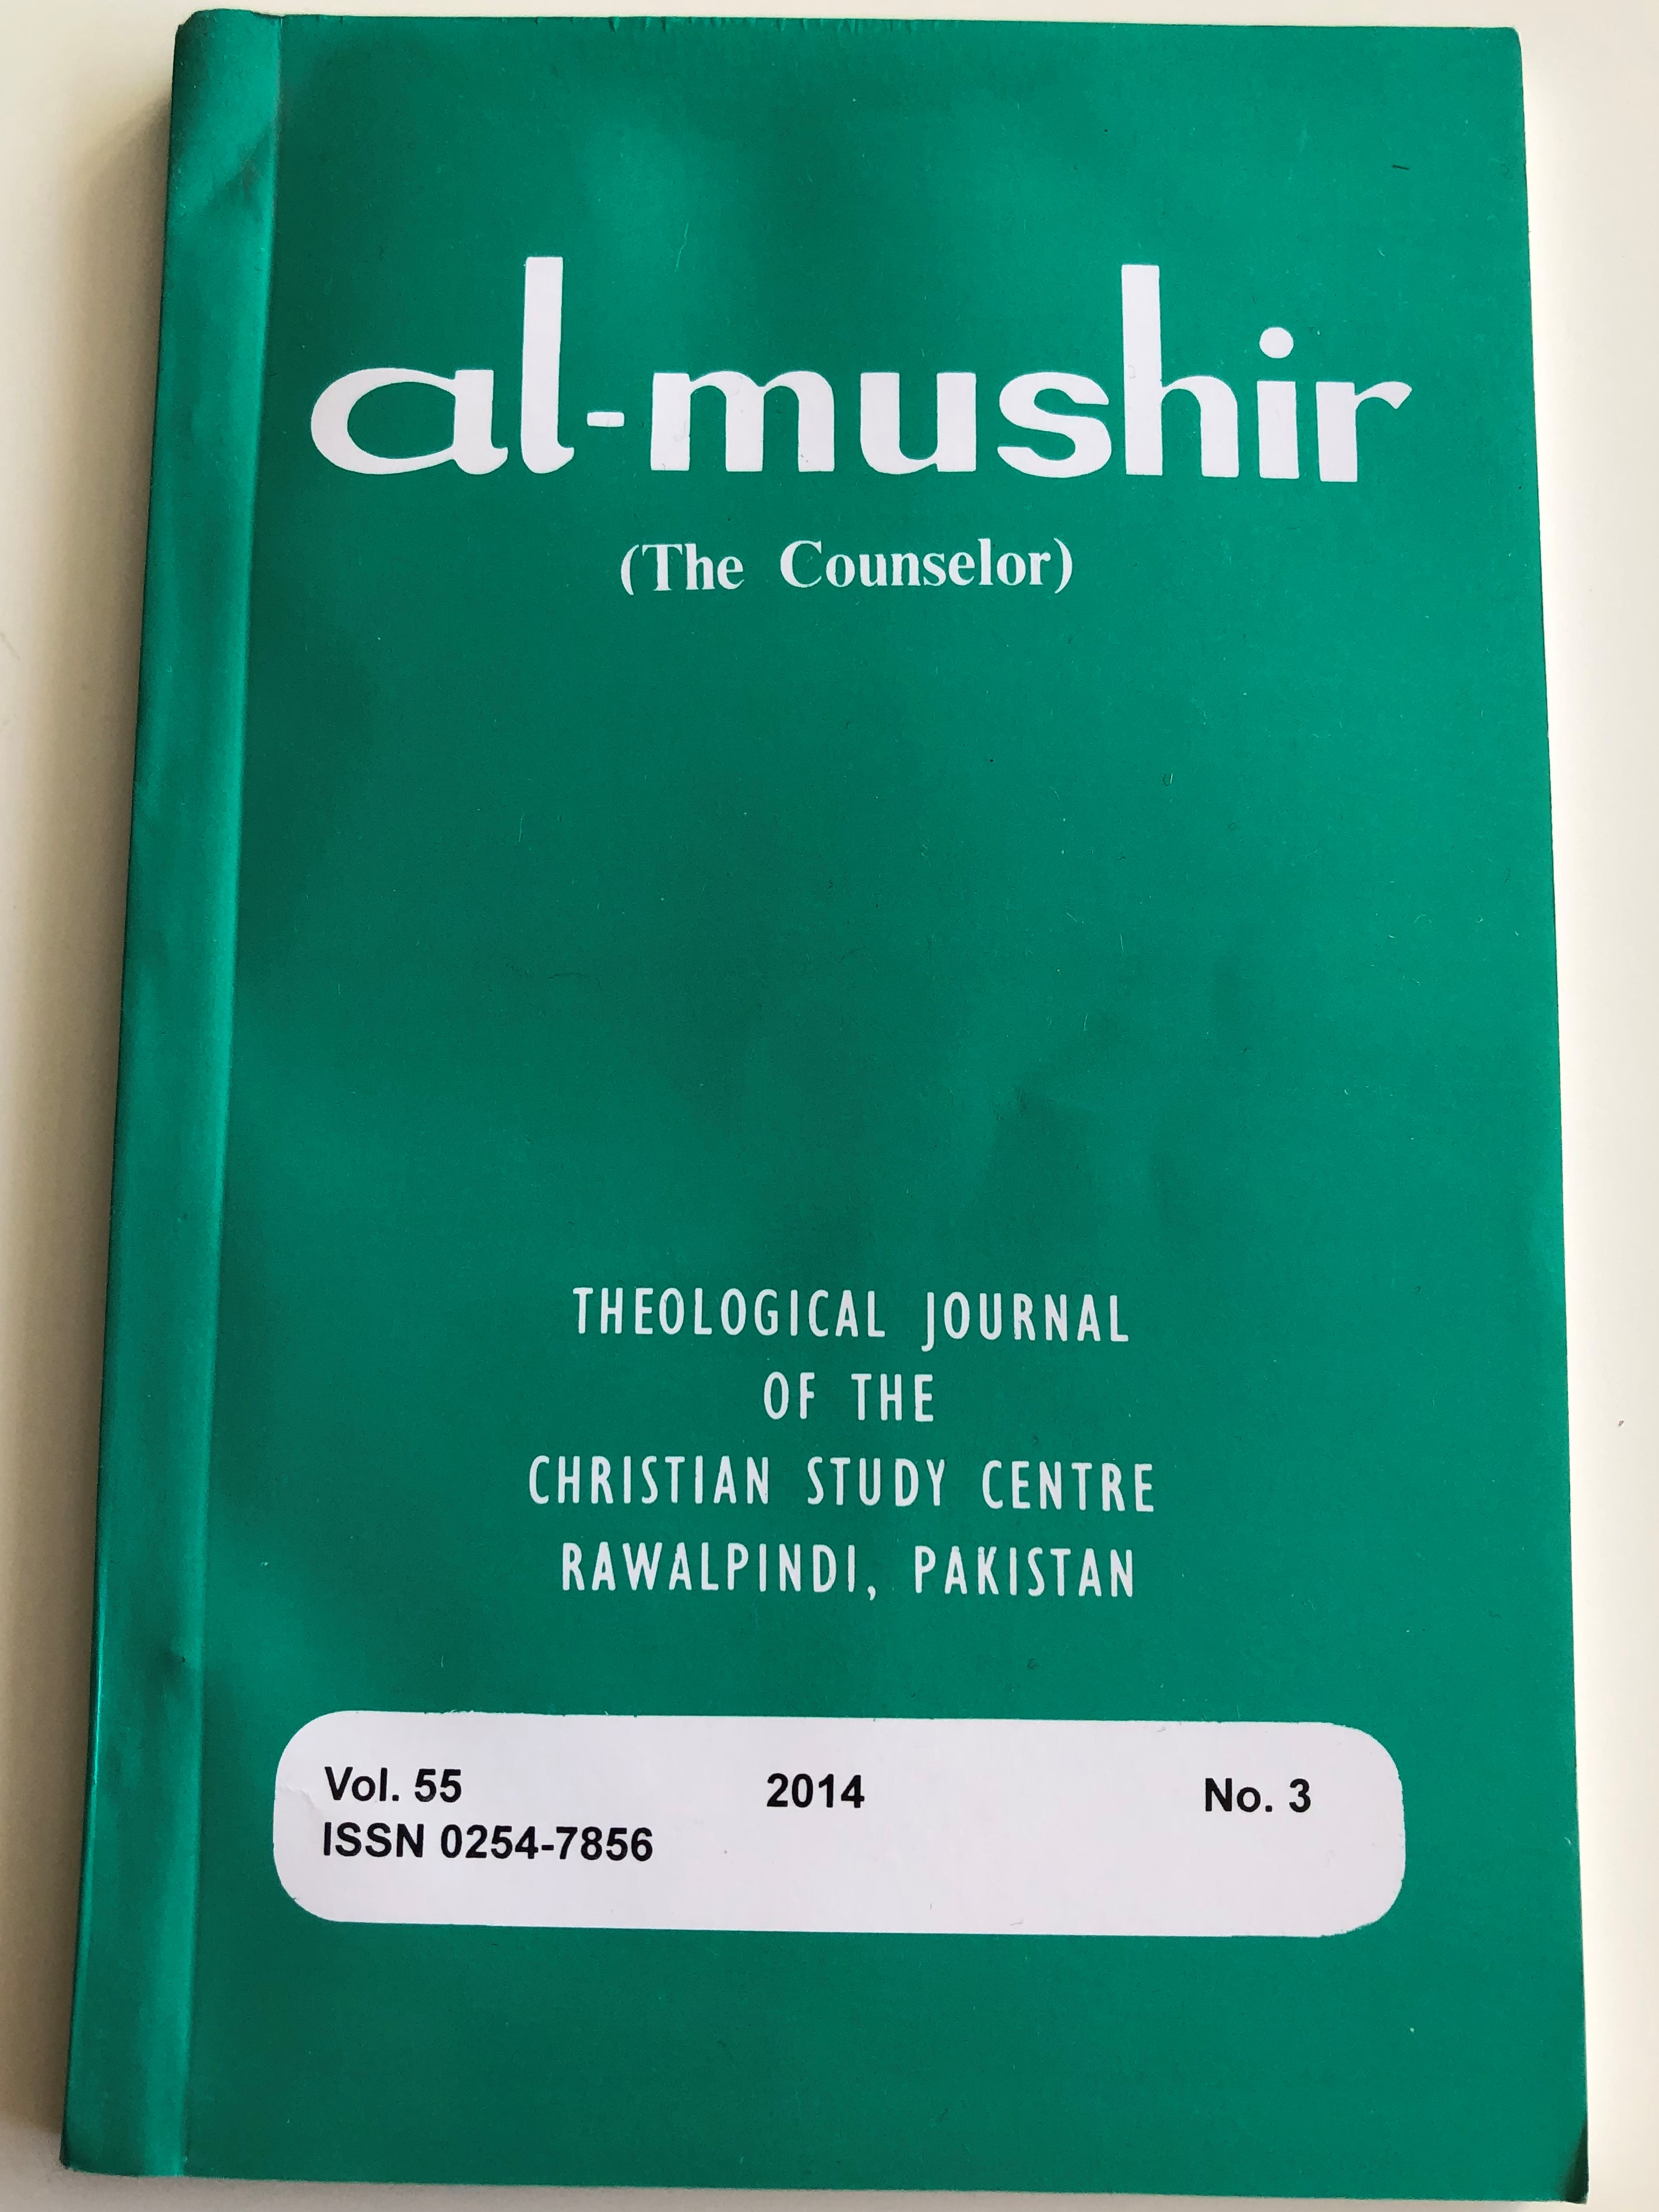 al-mushir-the-counselor-volume-55.-no.-3-theological-journal-of-the-christian-study-centre-1.jpg